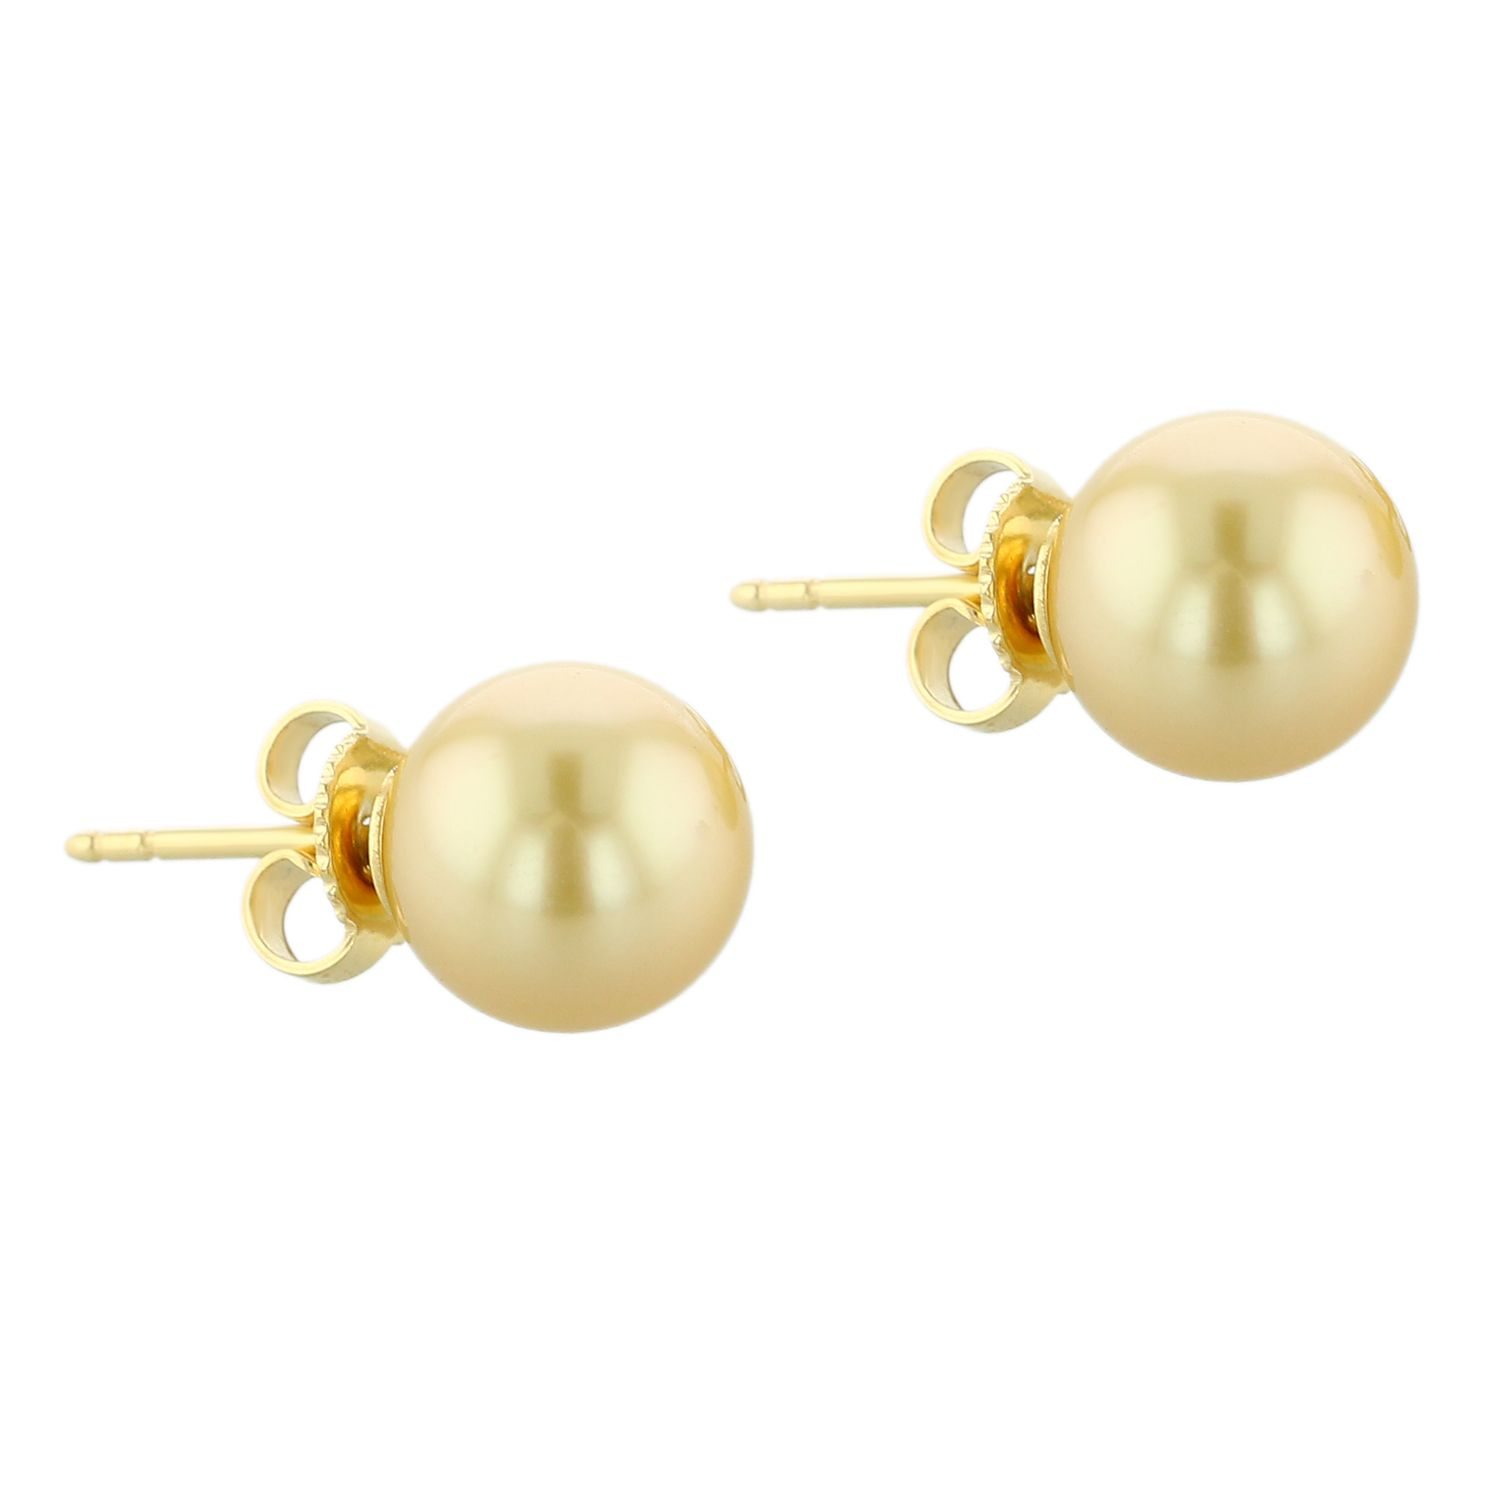 Image of Tiffany & Co. South Sea Pearl Earrings in 18K Yellow Gold.